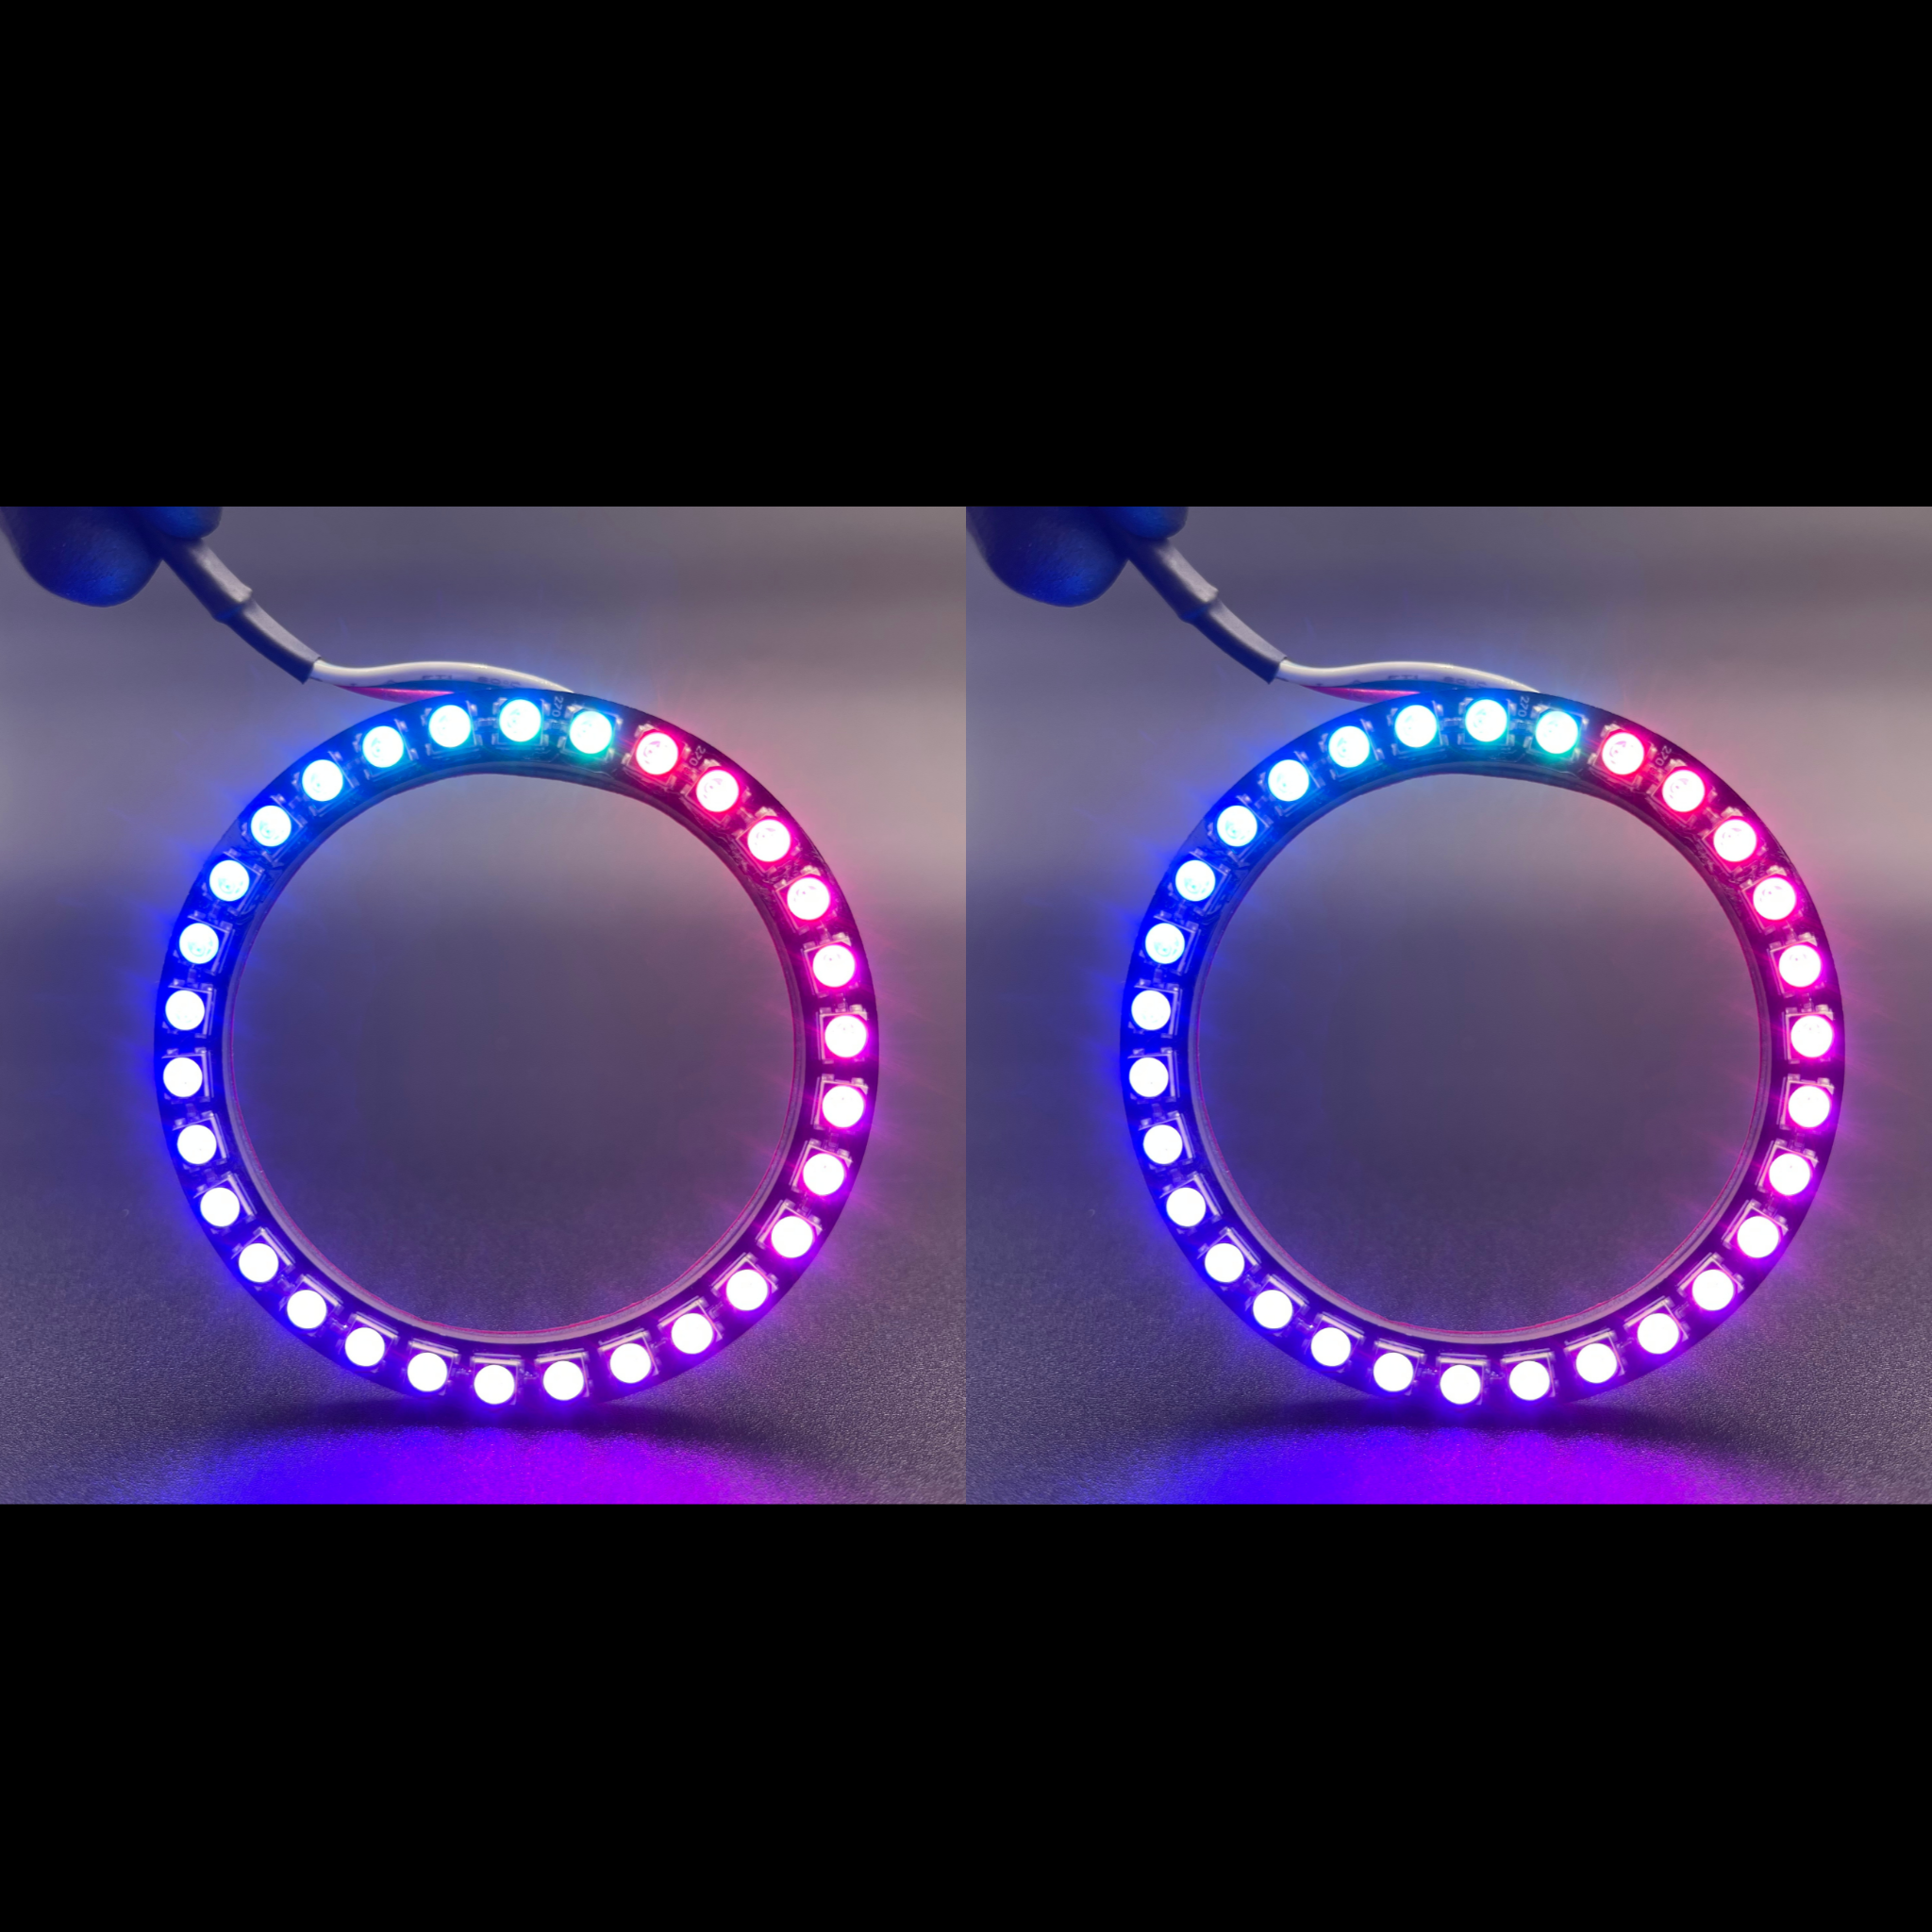 2000-2004 Ford Excursion Multicolor Halo Kit - RGB Halo Kits Multicolor Flow Series Color Chasing RGBWA LED headlight kit Colorshift Oracle Lighting Trendz OneUpLighting Morimoto theretrofitsource AutoLEDTech Diode Dynamics